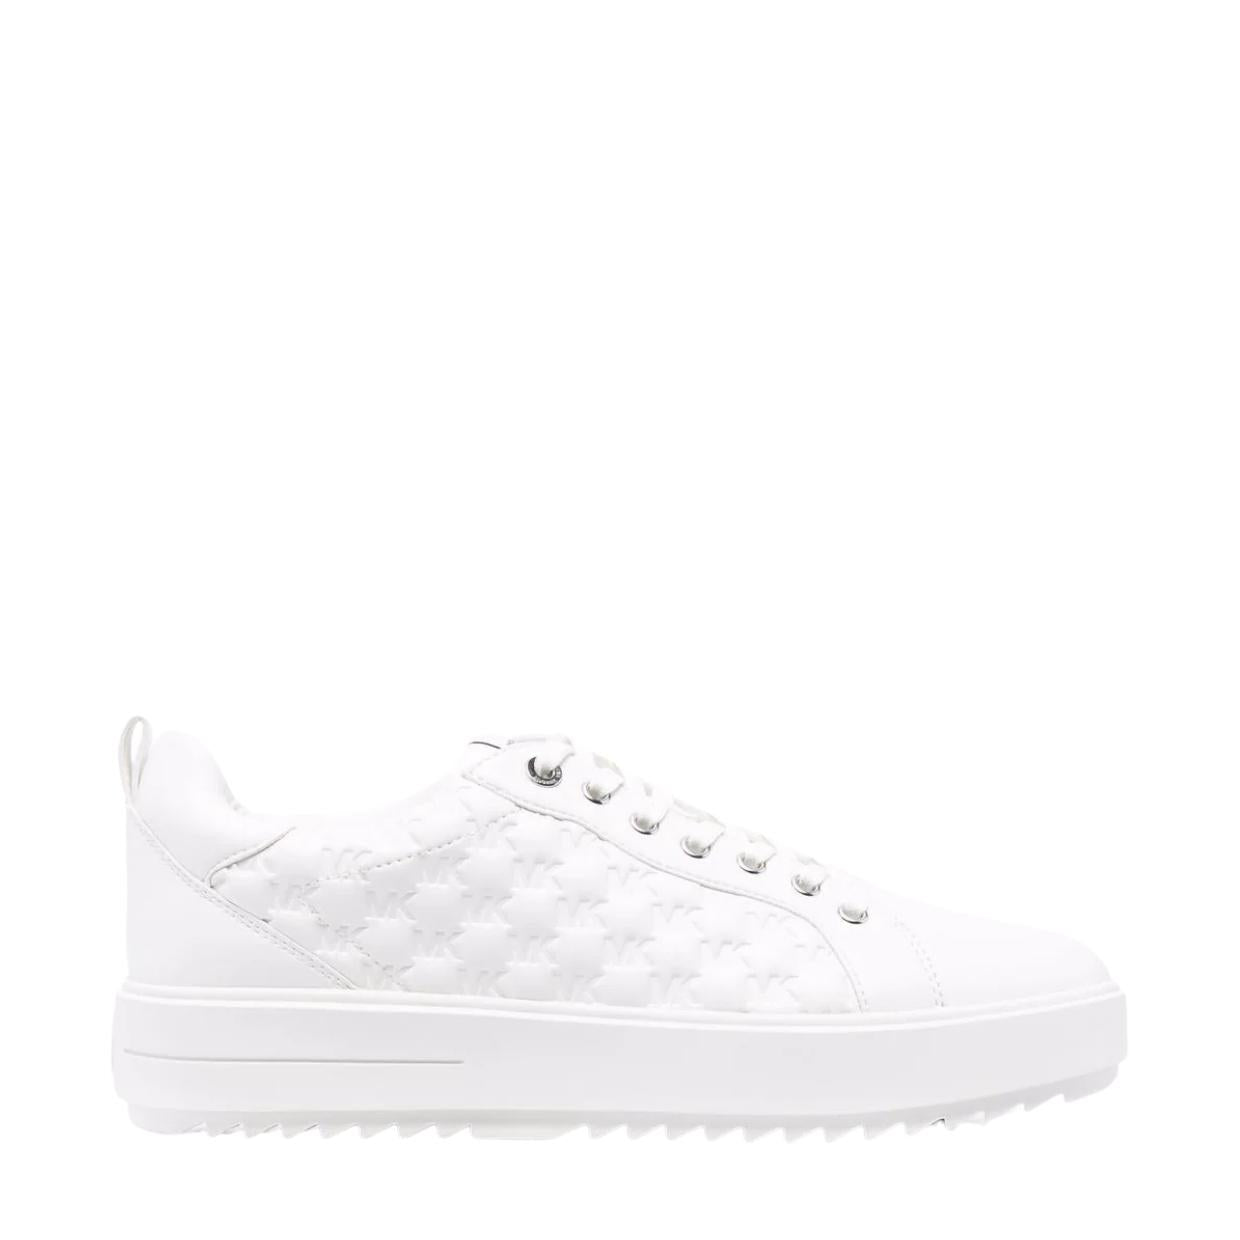 Discover collection sneakers Grove by Michael Kors now available online